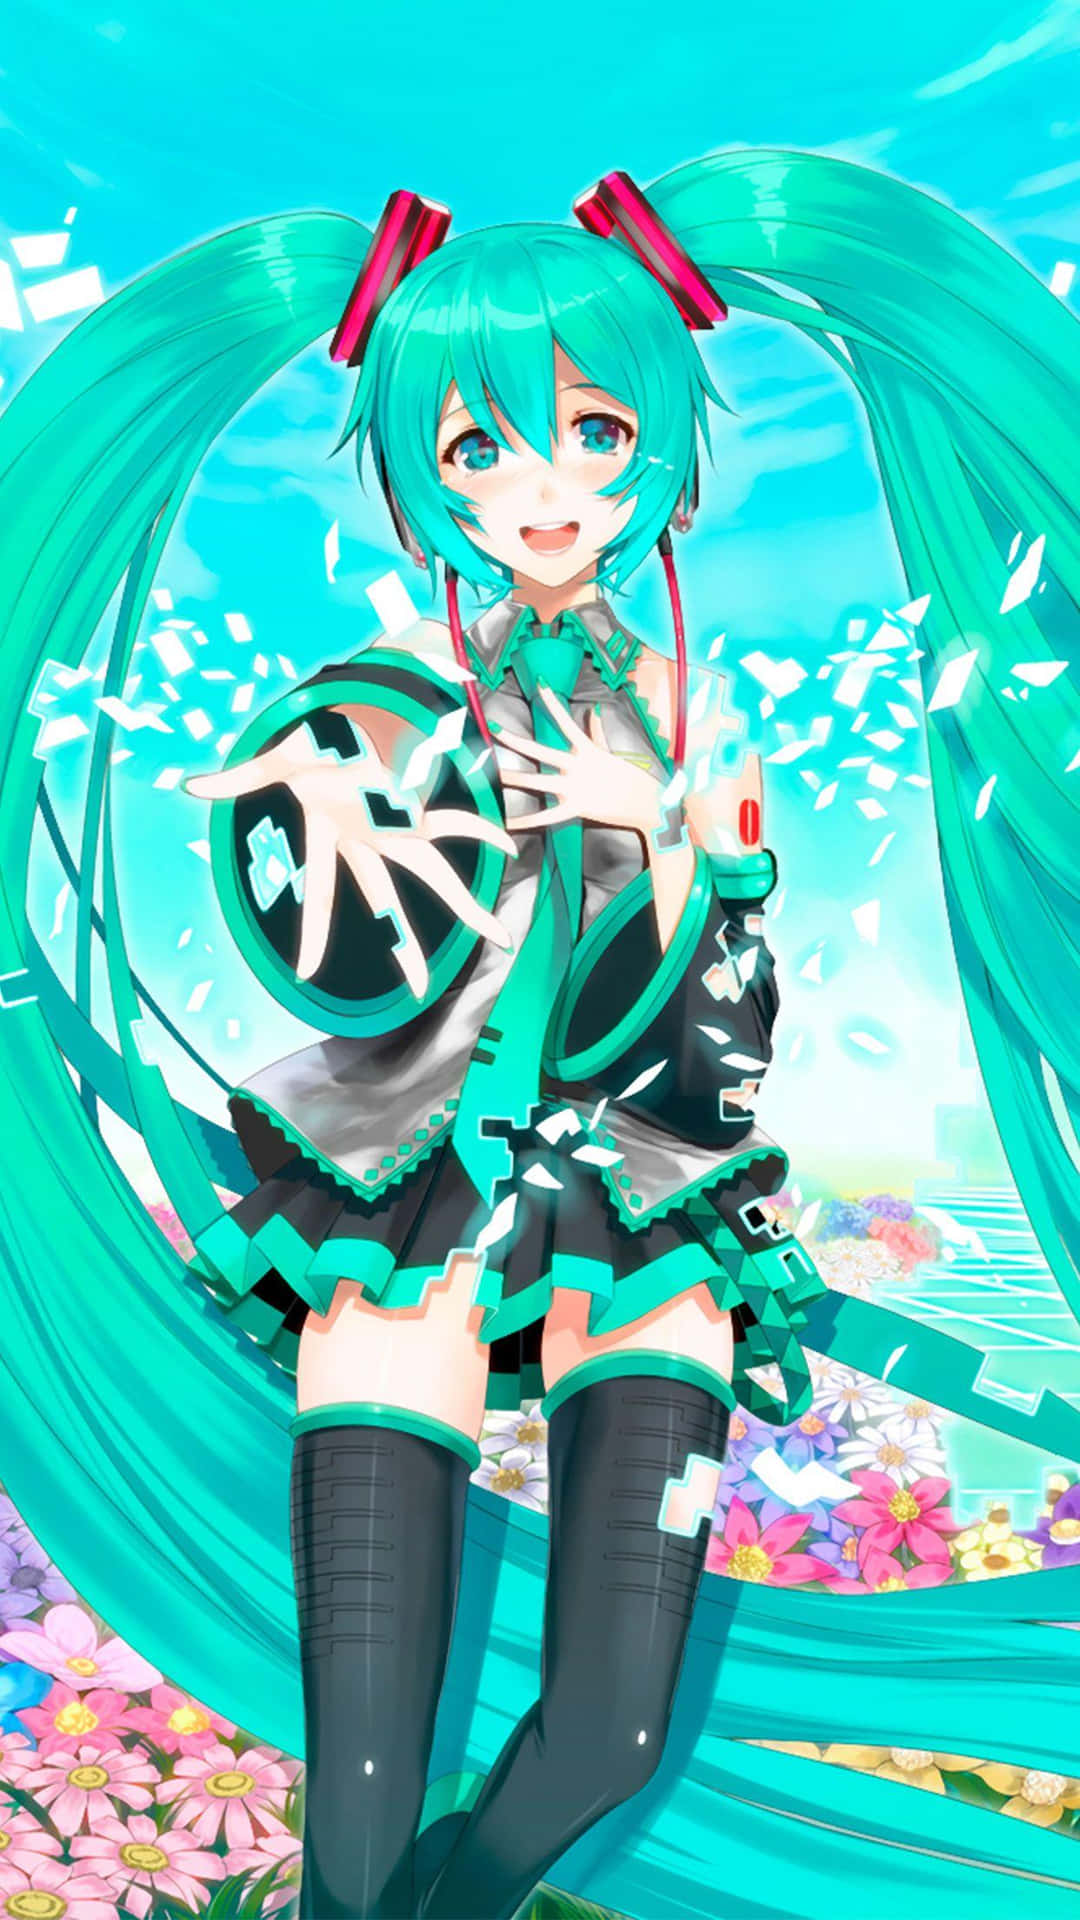 30 Hatsune Miku AppleiPhone 5 640x1136 Wallpapers  Mobile Abyss